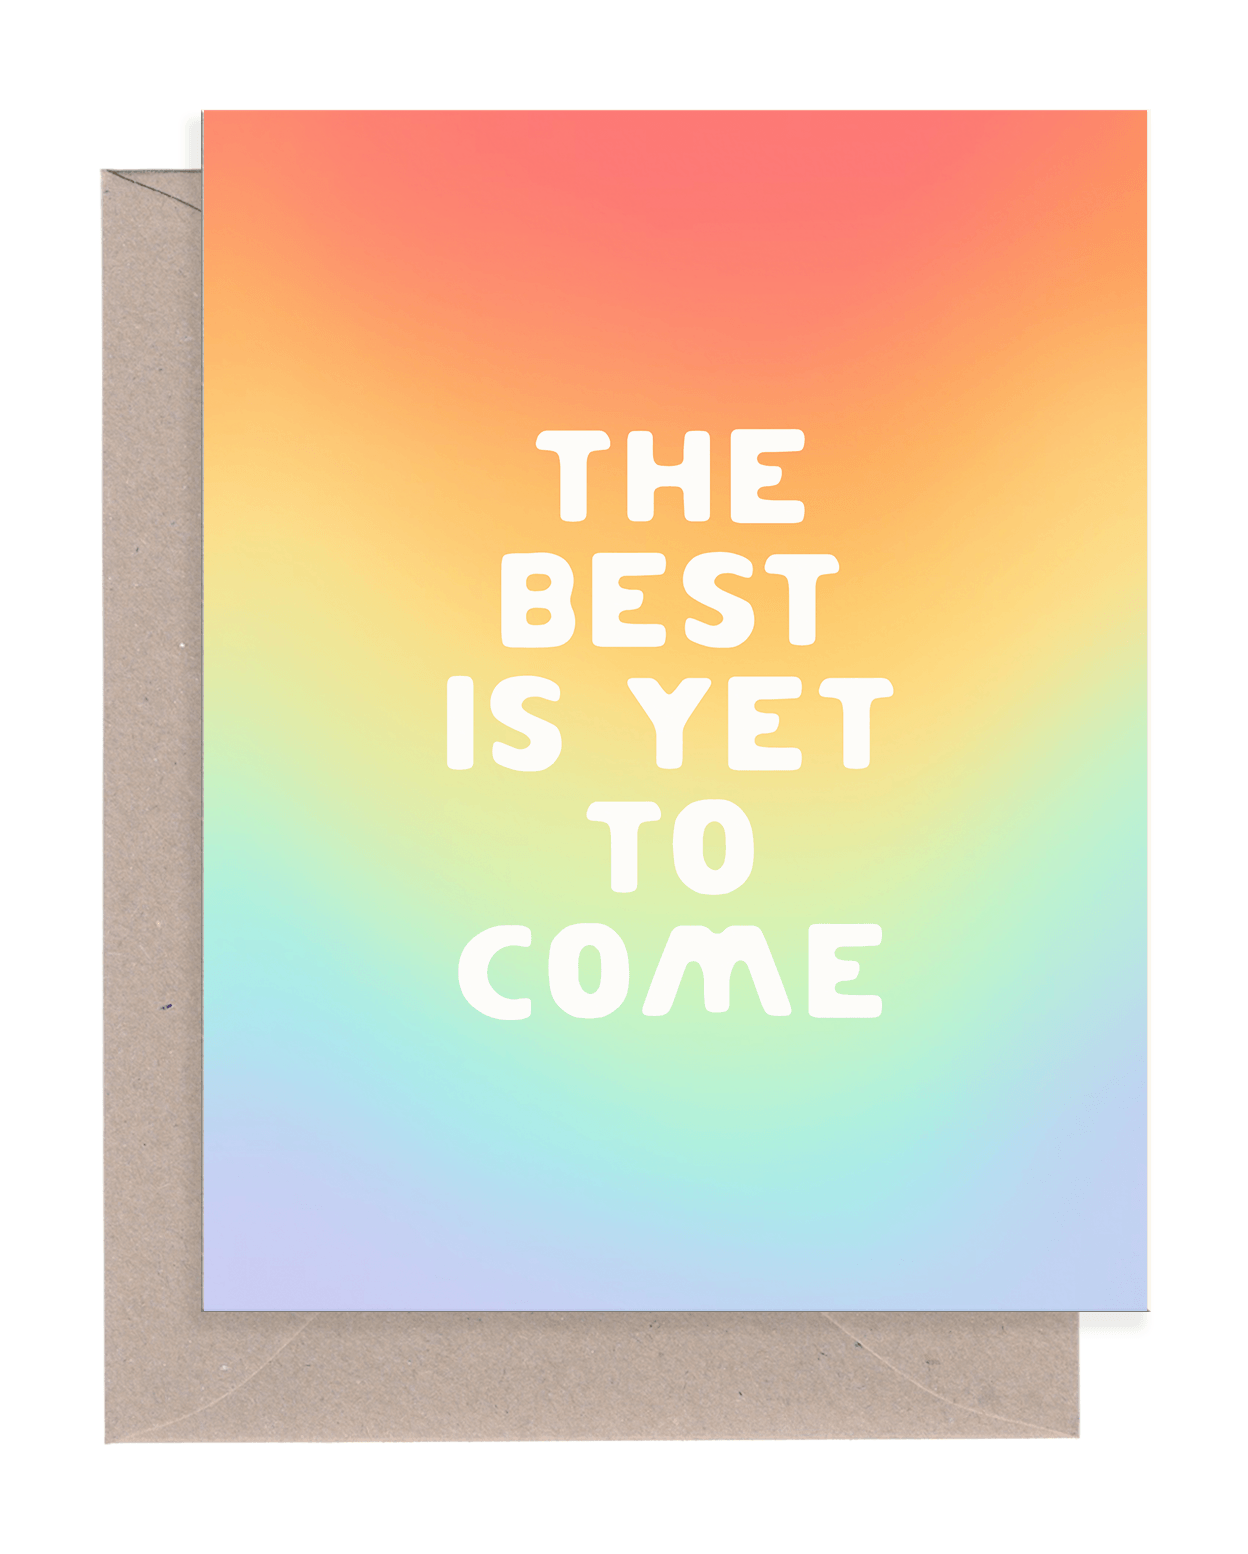 Rainbow gradient background with "The Best Is Yet To Come" in bold, white font printed on cardstock  resting on a kraft envelope.